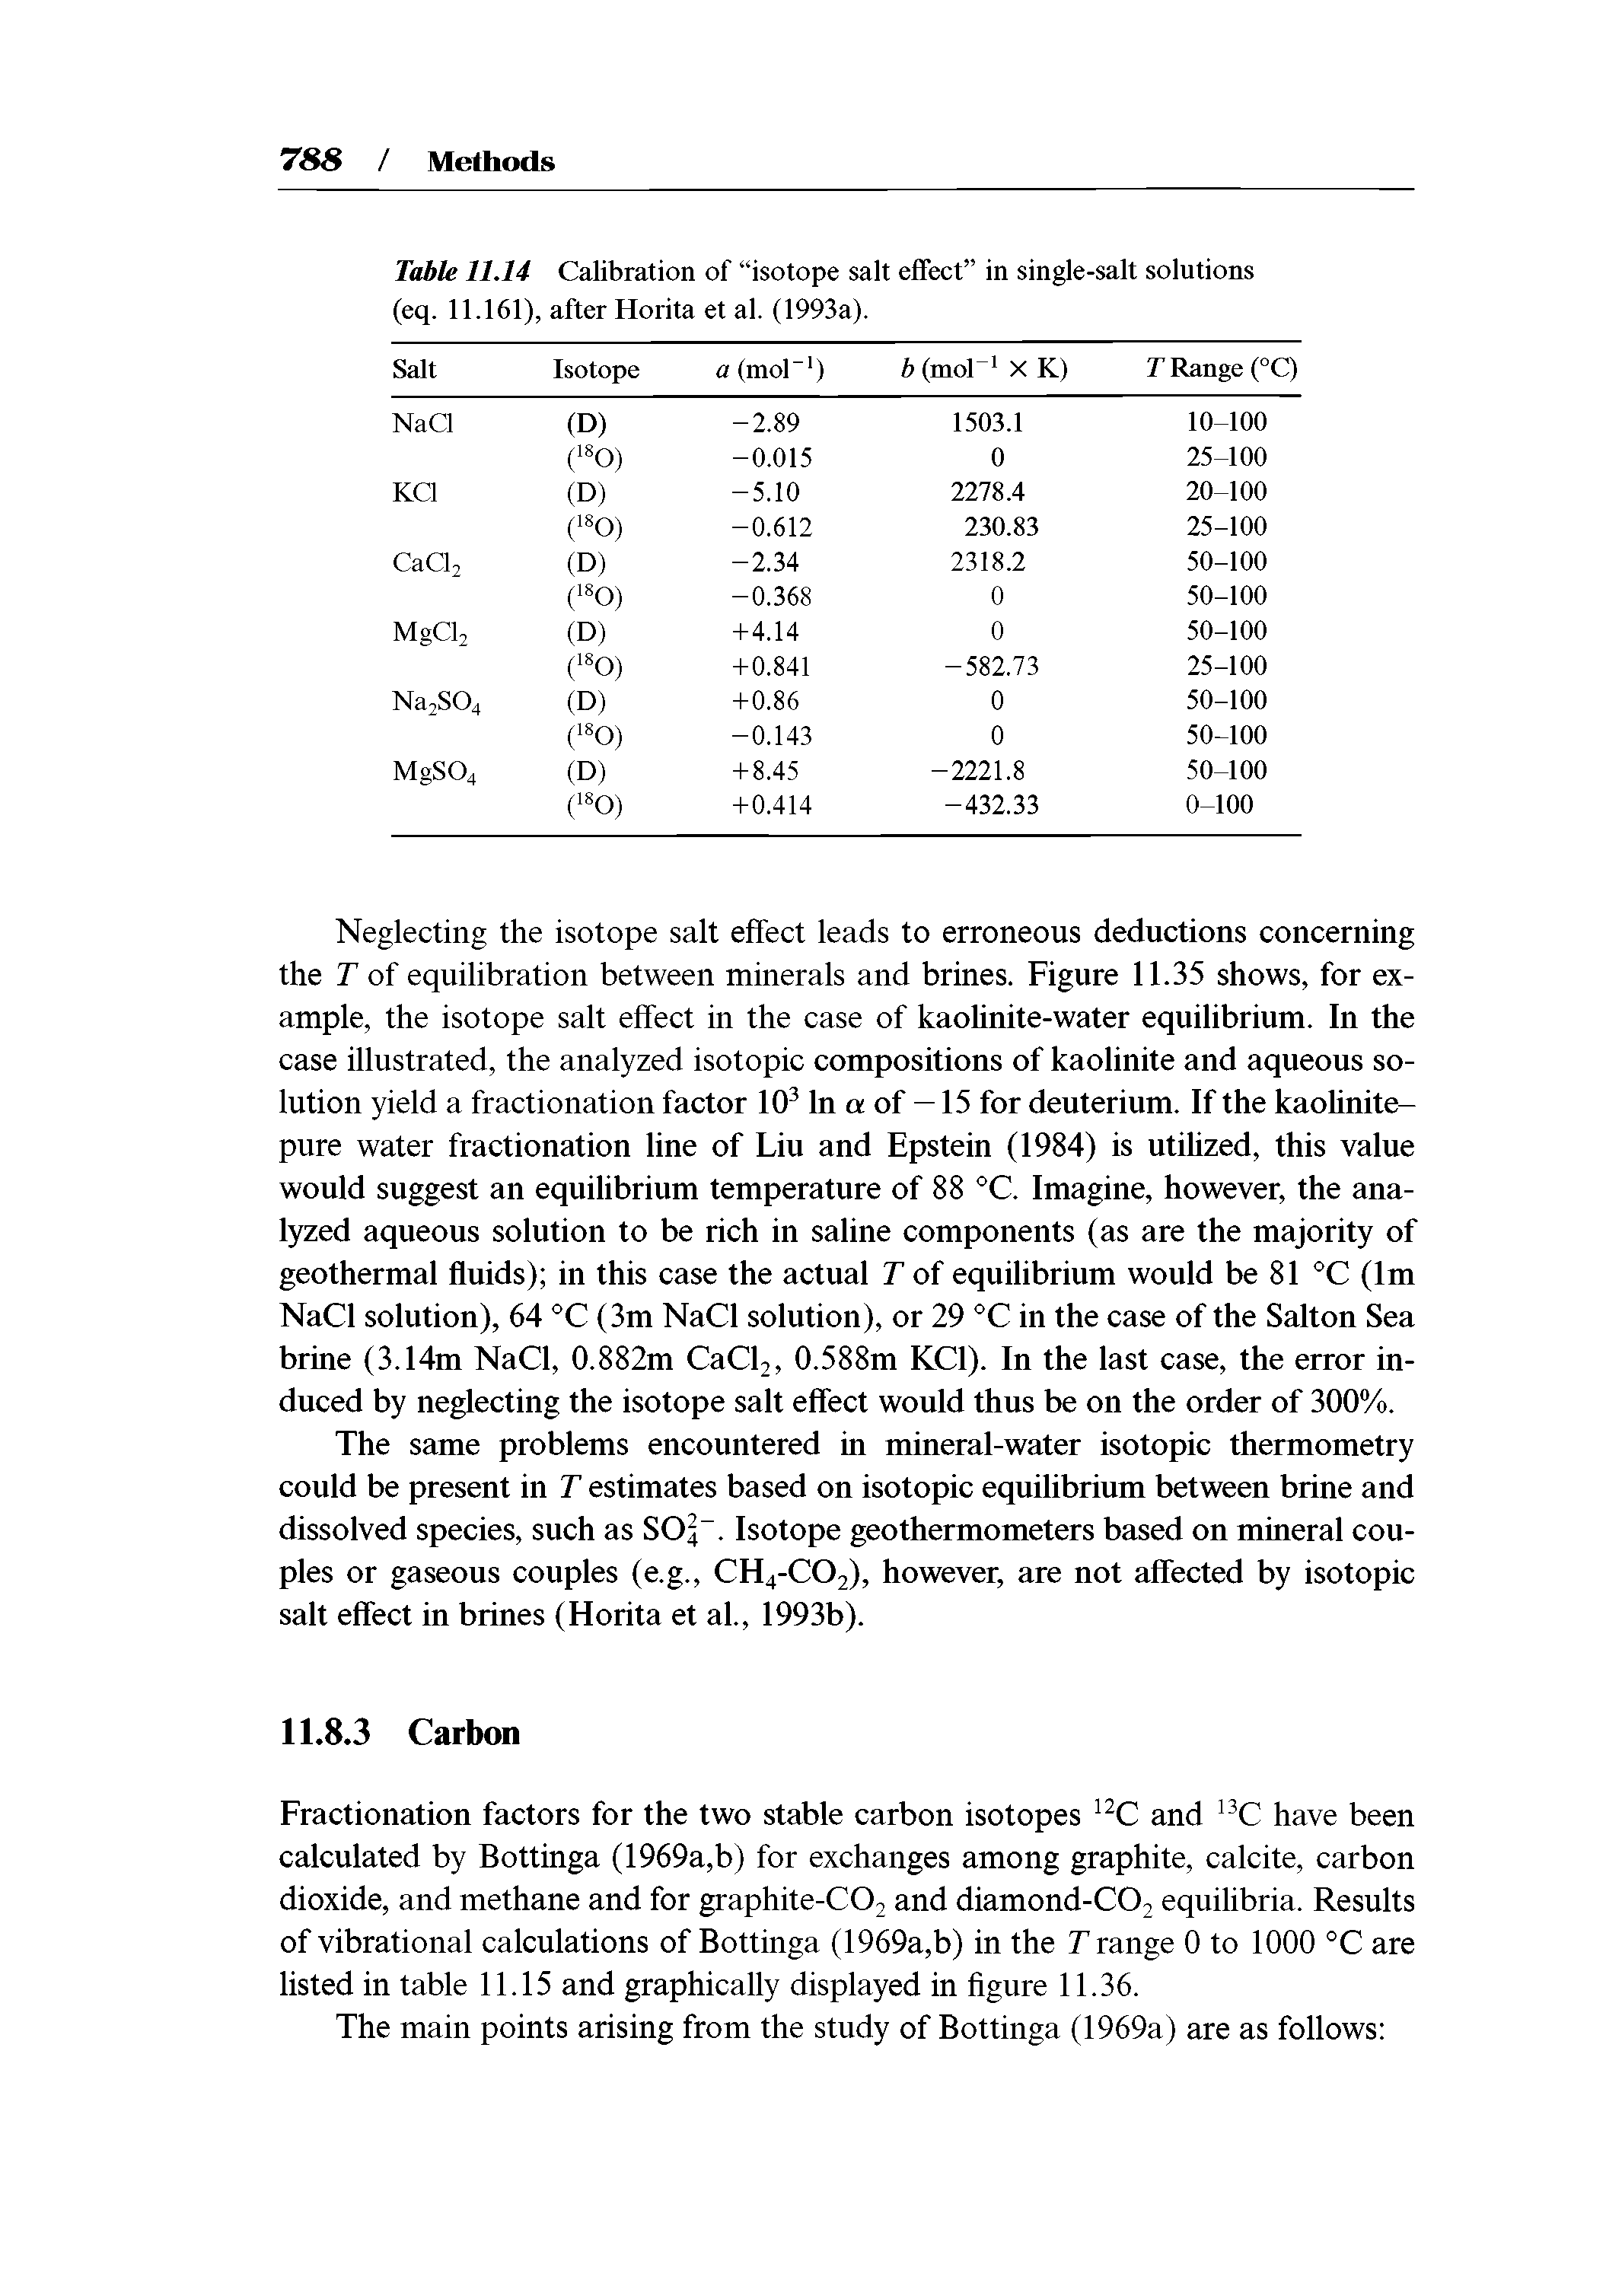 Table 11.14 Calibration of isotope salt effect in single-salt solntions (eq. 11.161), after Horita et al. (1993a).